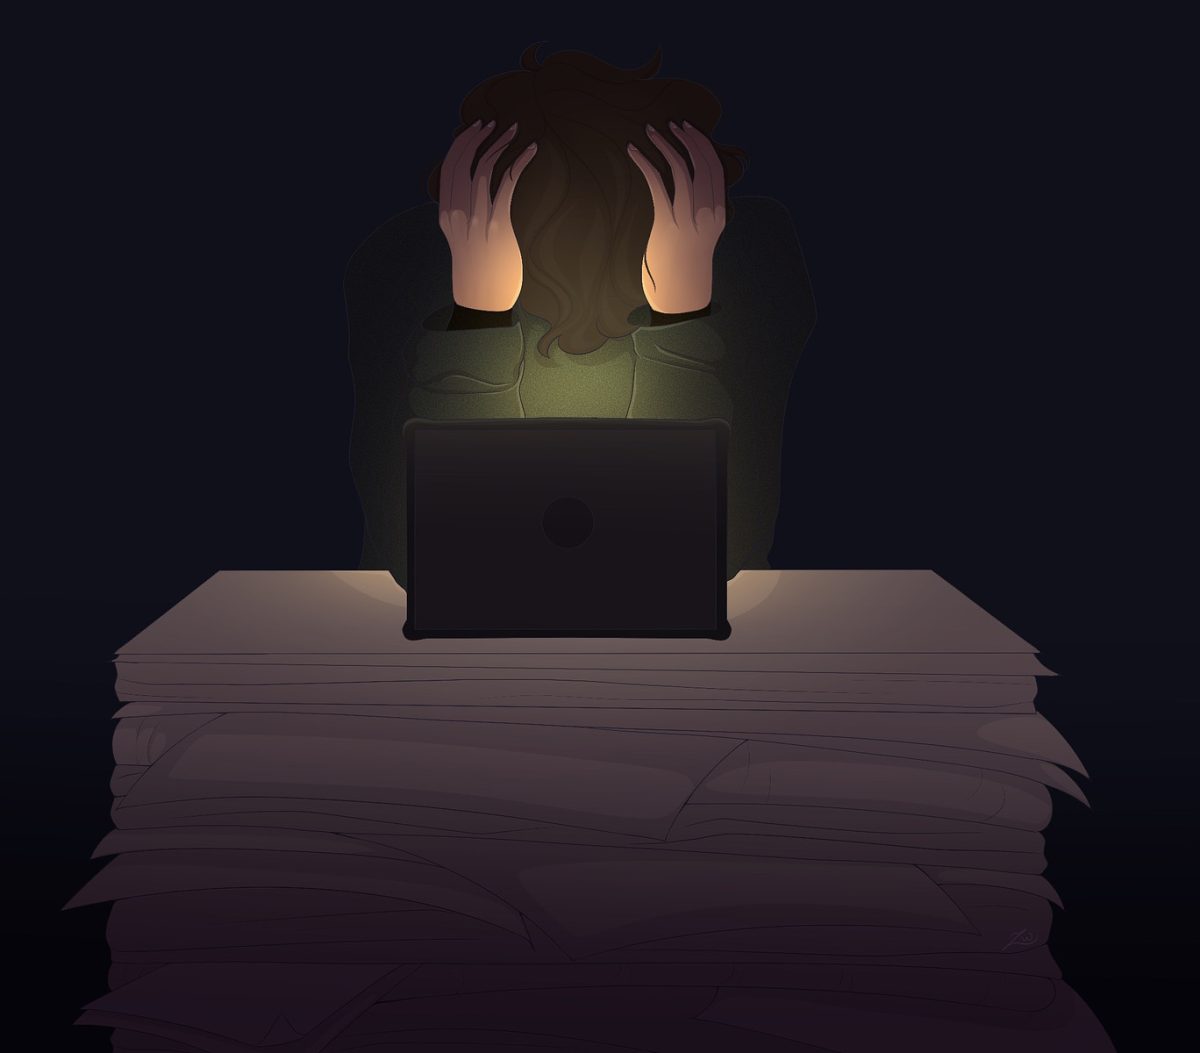 The large amounts of schoolwork may cause students to deprive of sleep to guarantee good academic results, leading to many unfortunate health consequences.